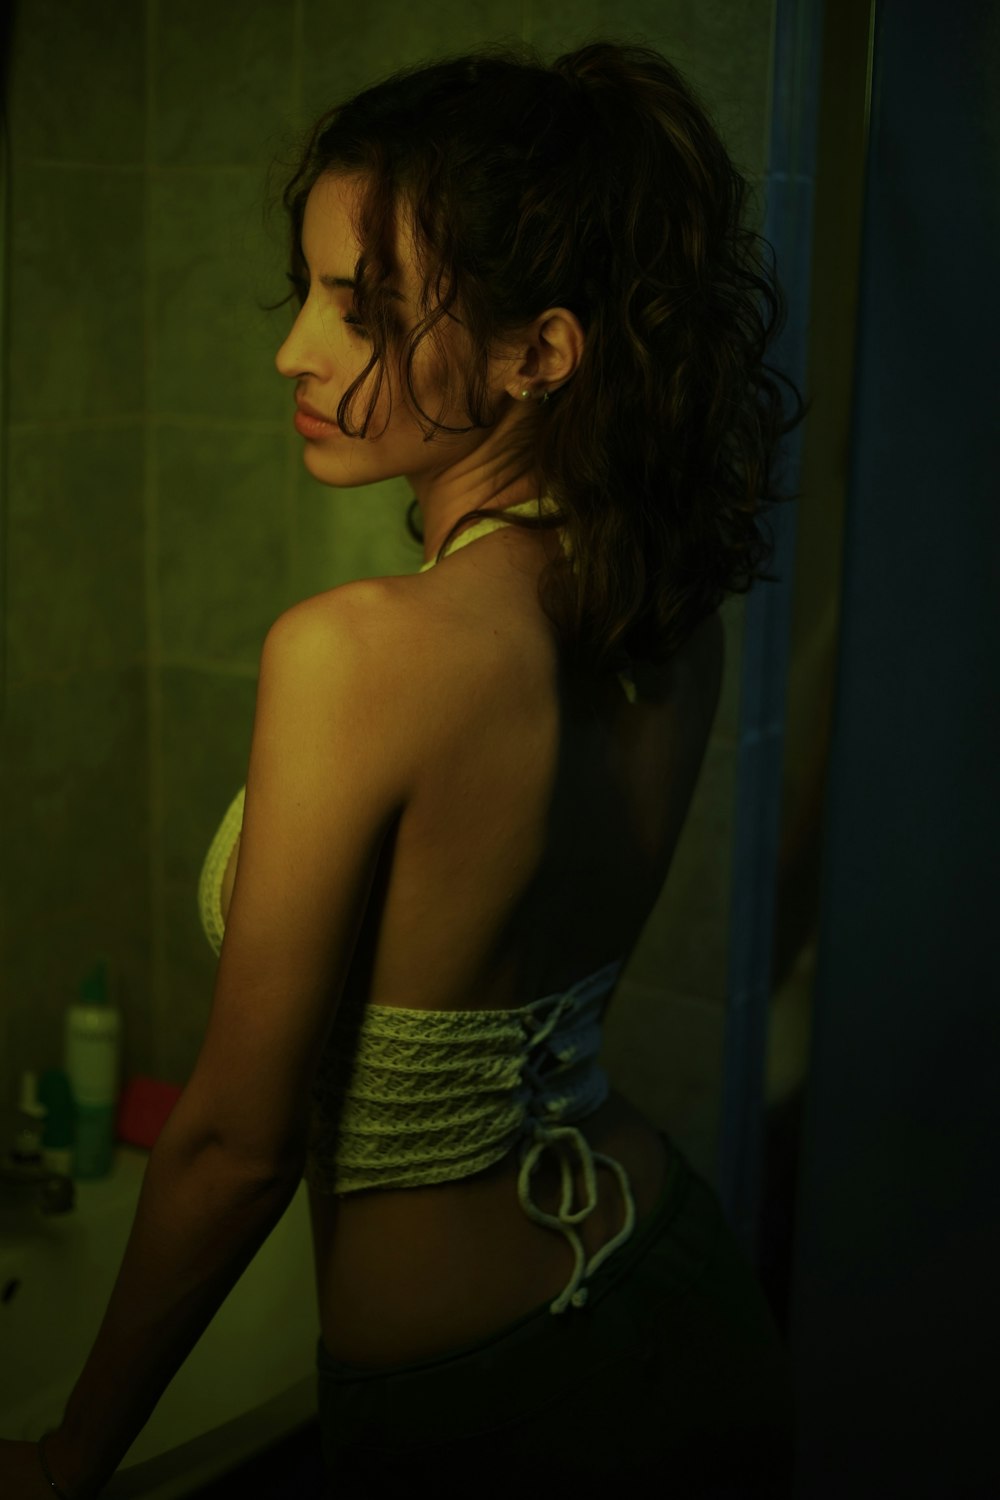 a woman standing in front of a mirror in a bathroom